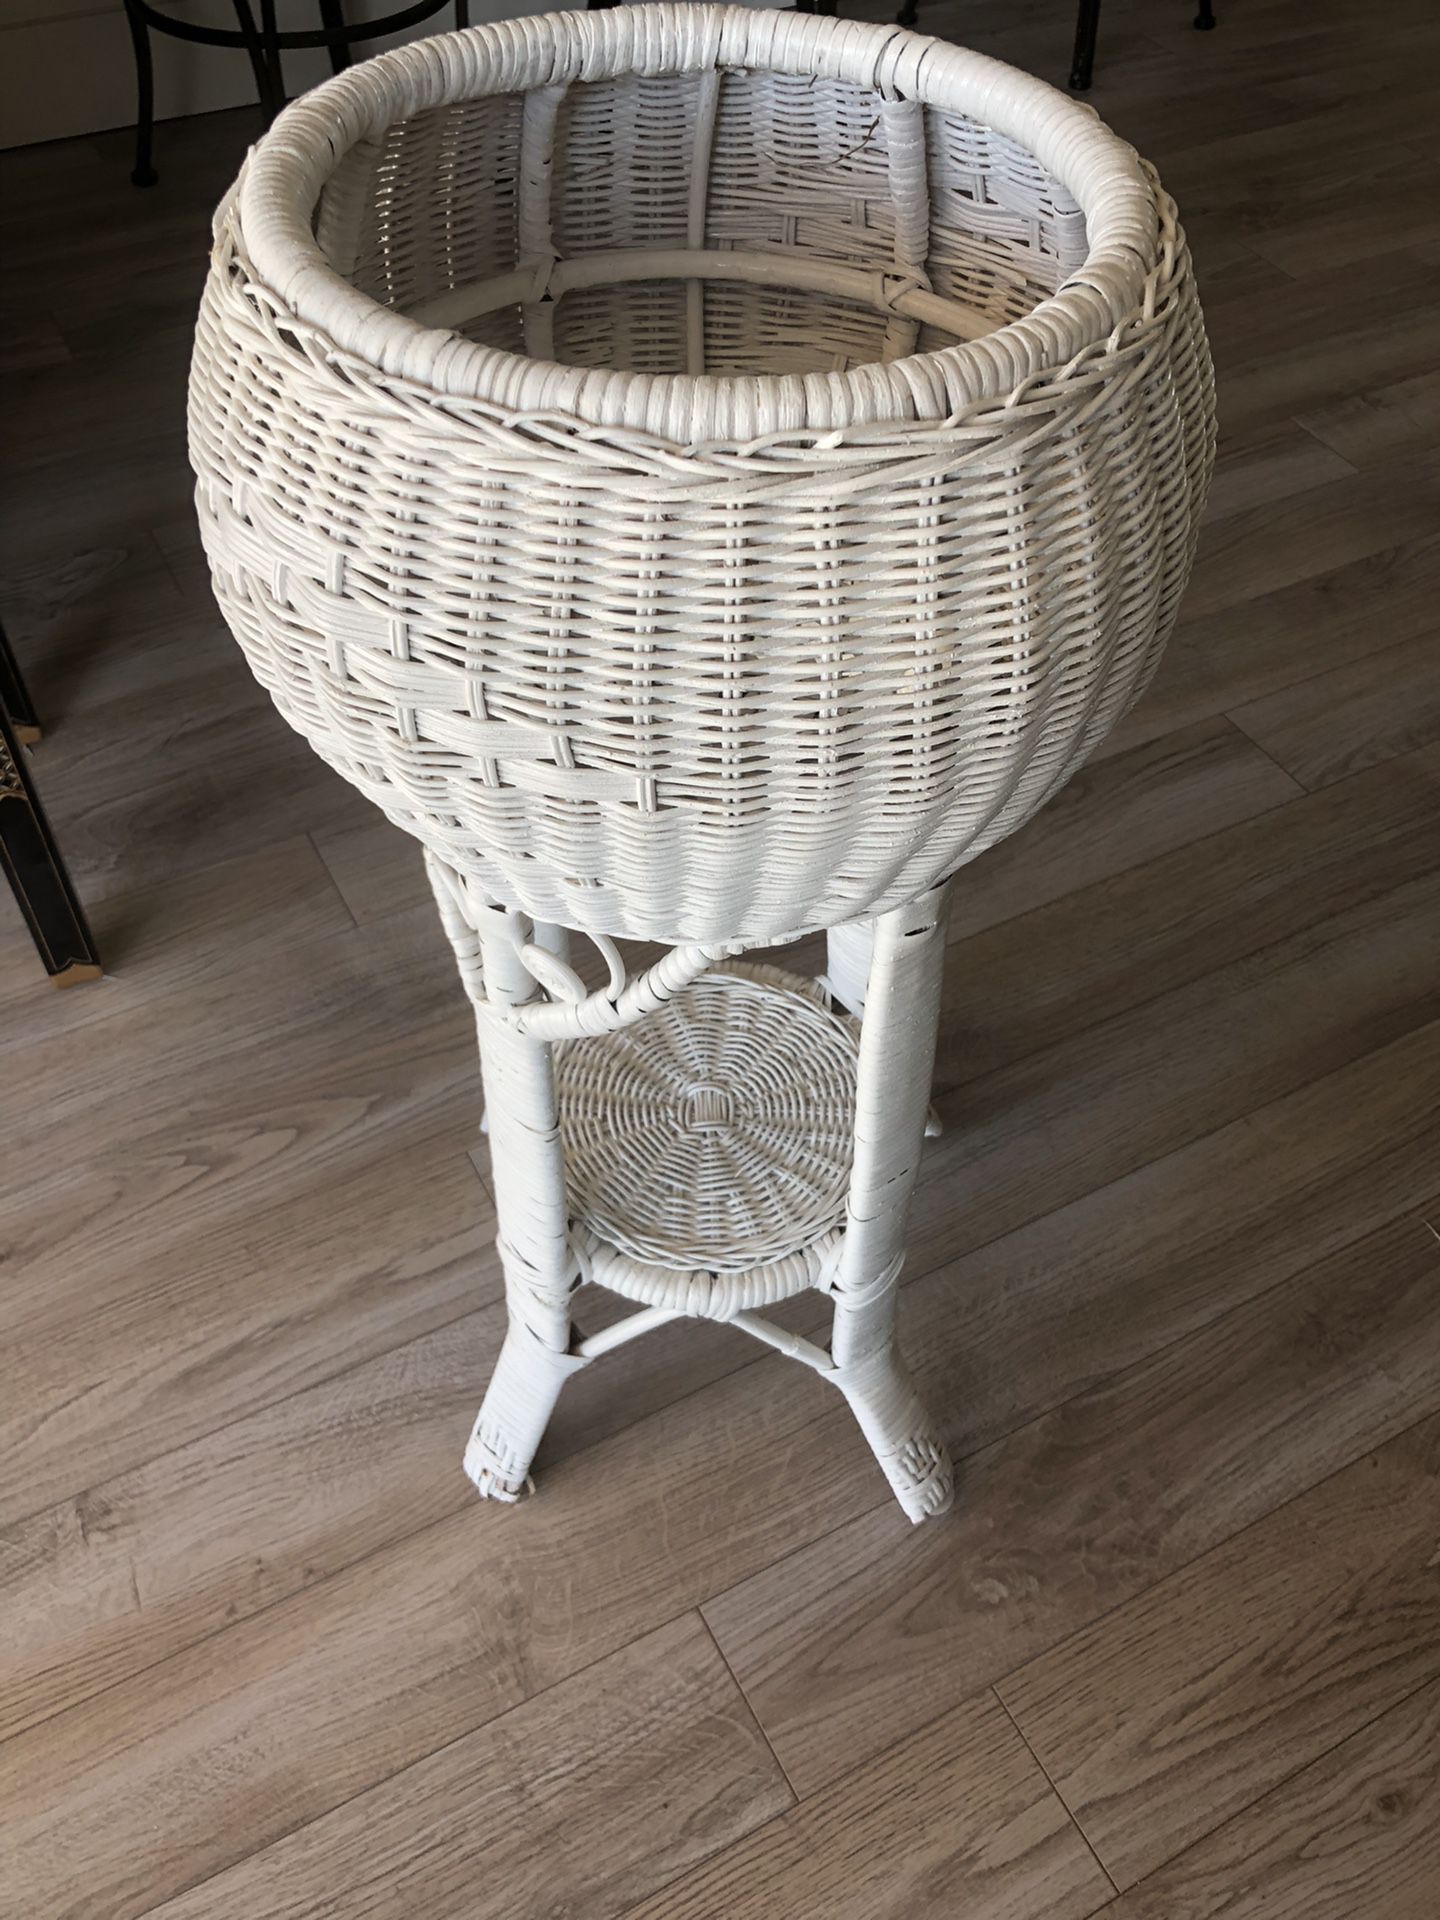 Large Vintage BoHo 29" Wicker, Bamboo Plant Stand Plant Holder